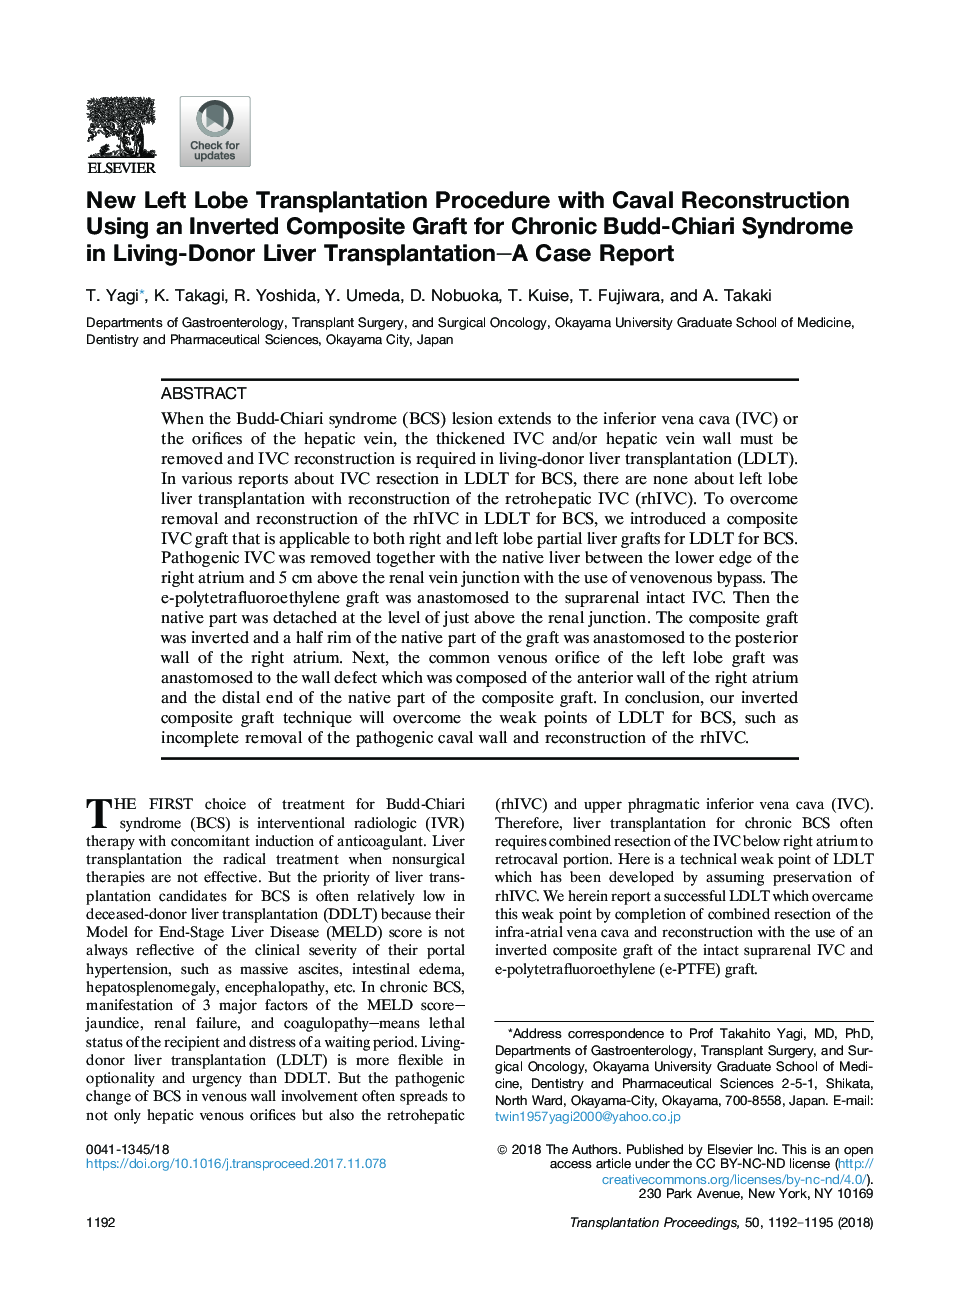 New Left Lobe Transplantation Procedure with Caval Reconstruction Using an Inverted Composite Graft for Chronic Budd-Chiari Syndrome in Living-Donor Liver Transplantation-A Case Report